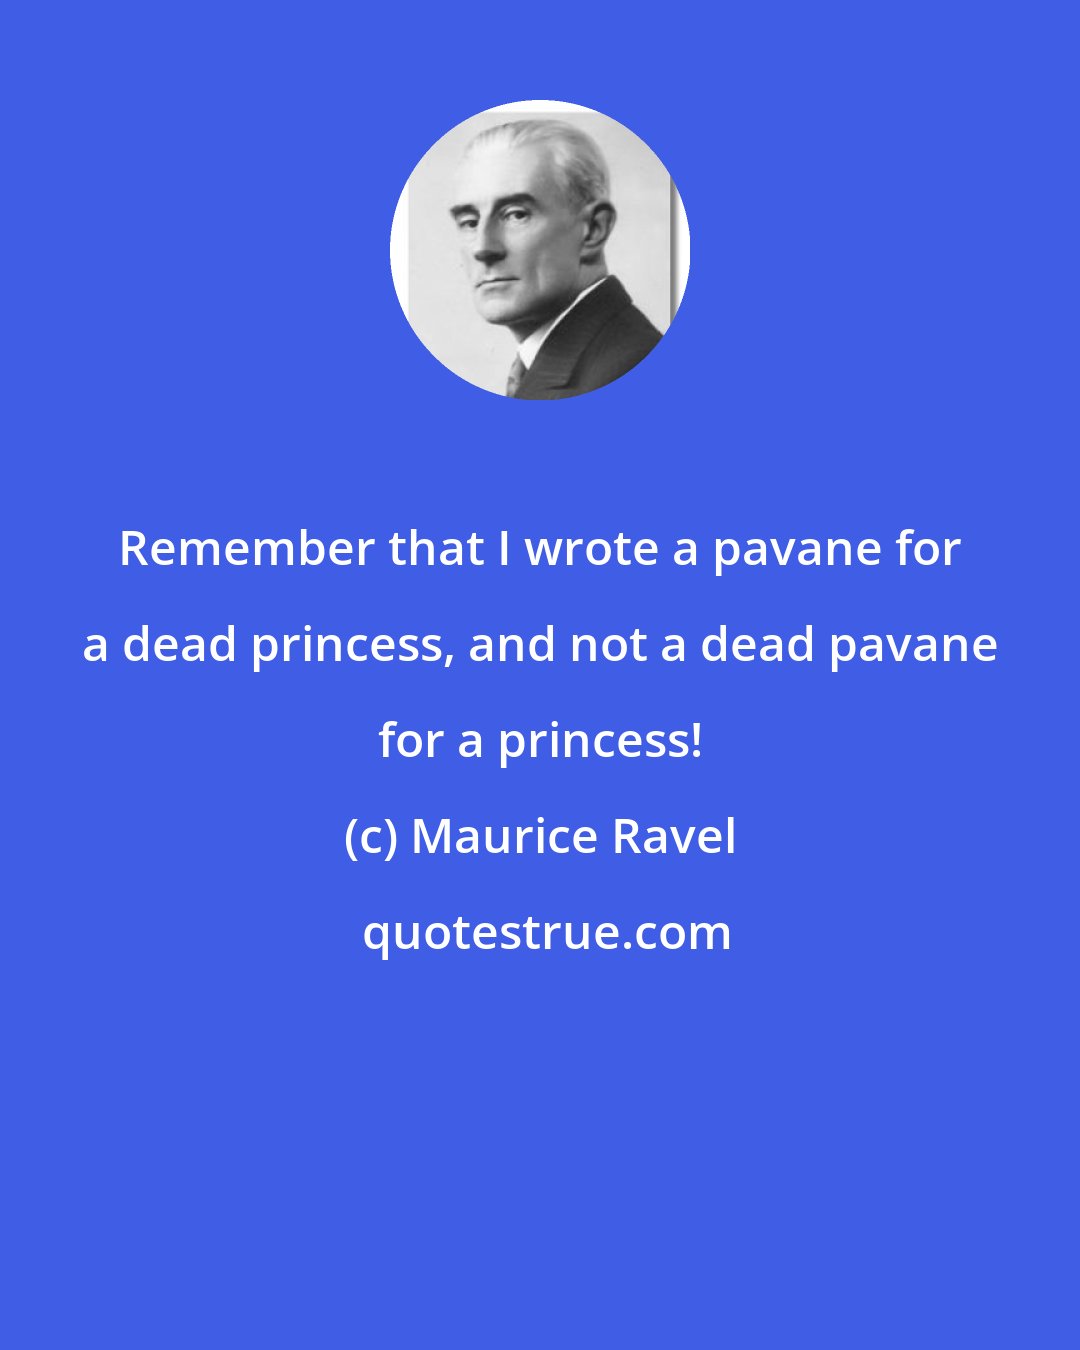 Maurice Ravel: Remember that I wrote a pavane for a dead princess, and not a dead pavane for a princess!